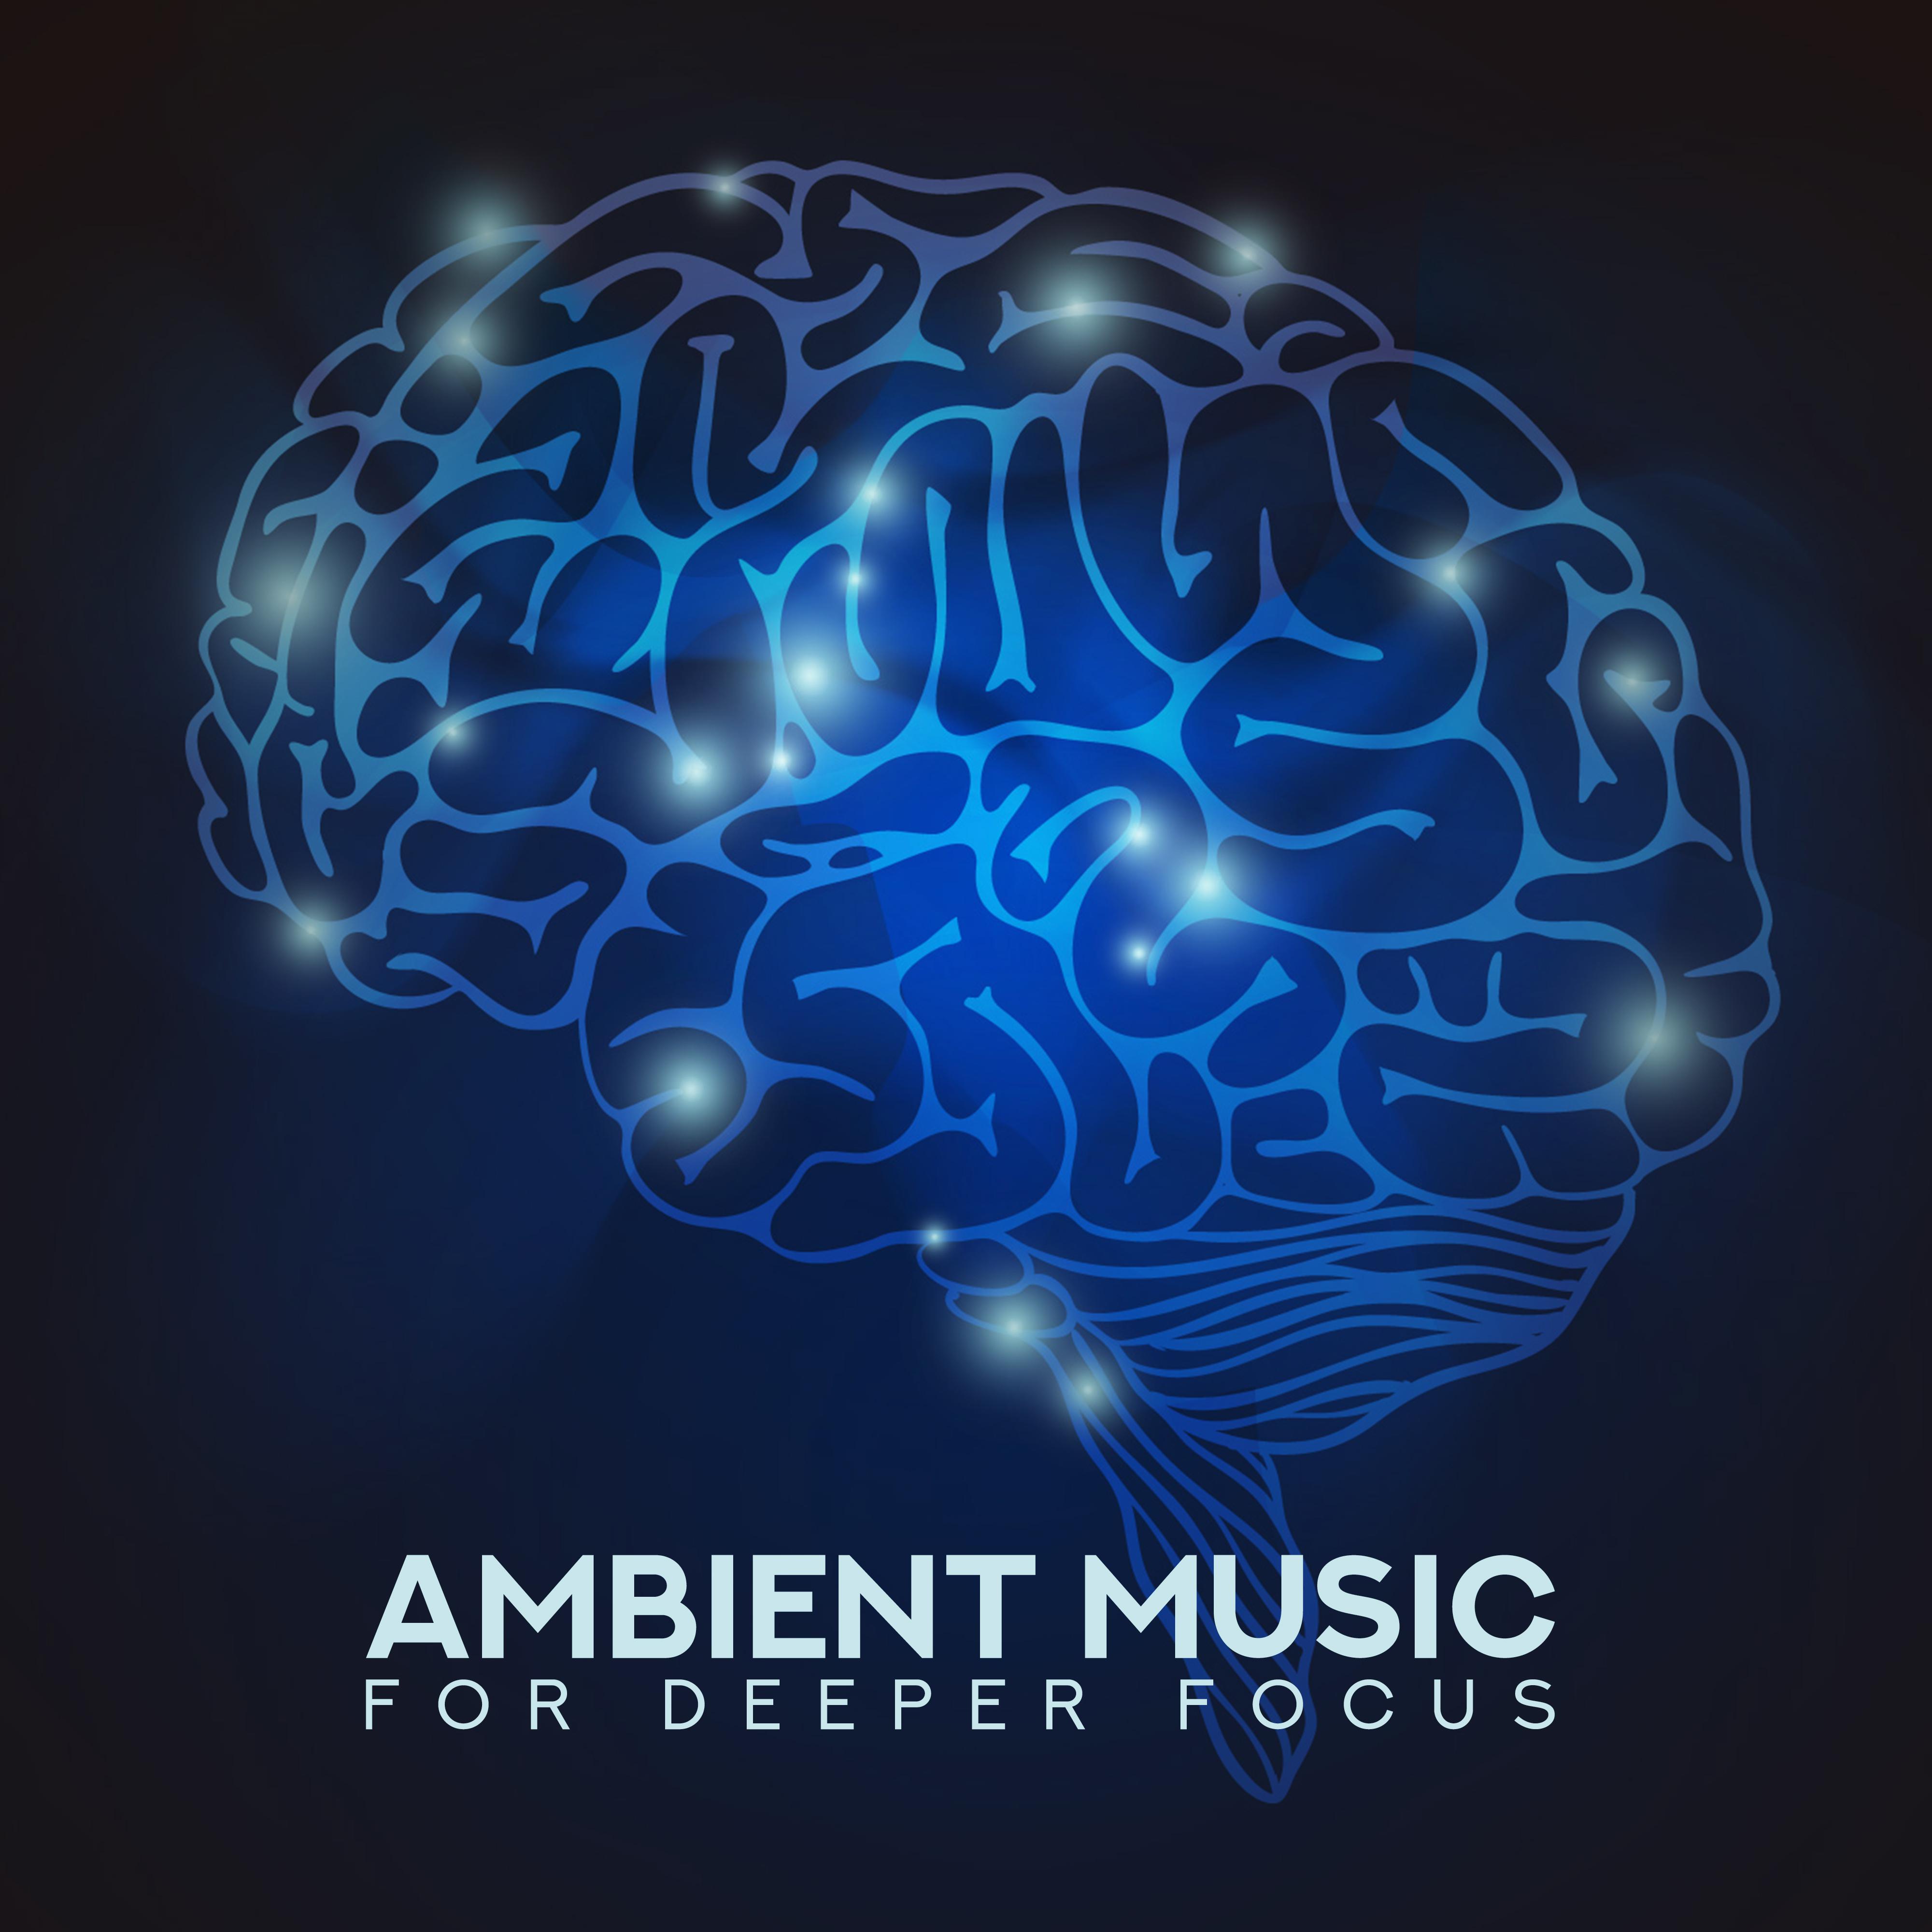 Ambient Music for Deeper Focus: Reading Music, Study Music, Brain Power, Deep Concentration, Nature Sounds, Piano Ambient, Lounge, Relaxation